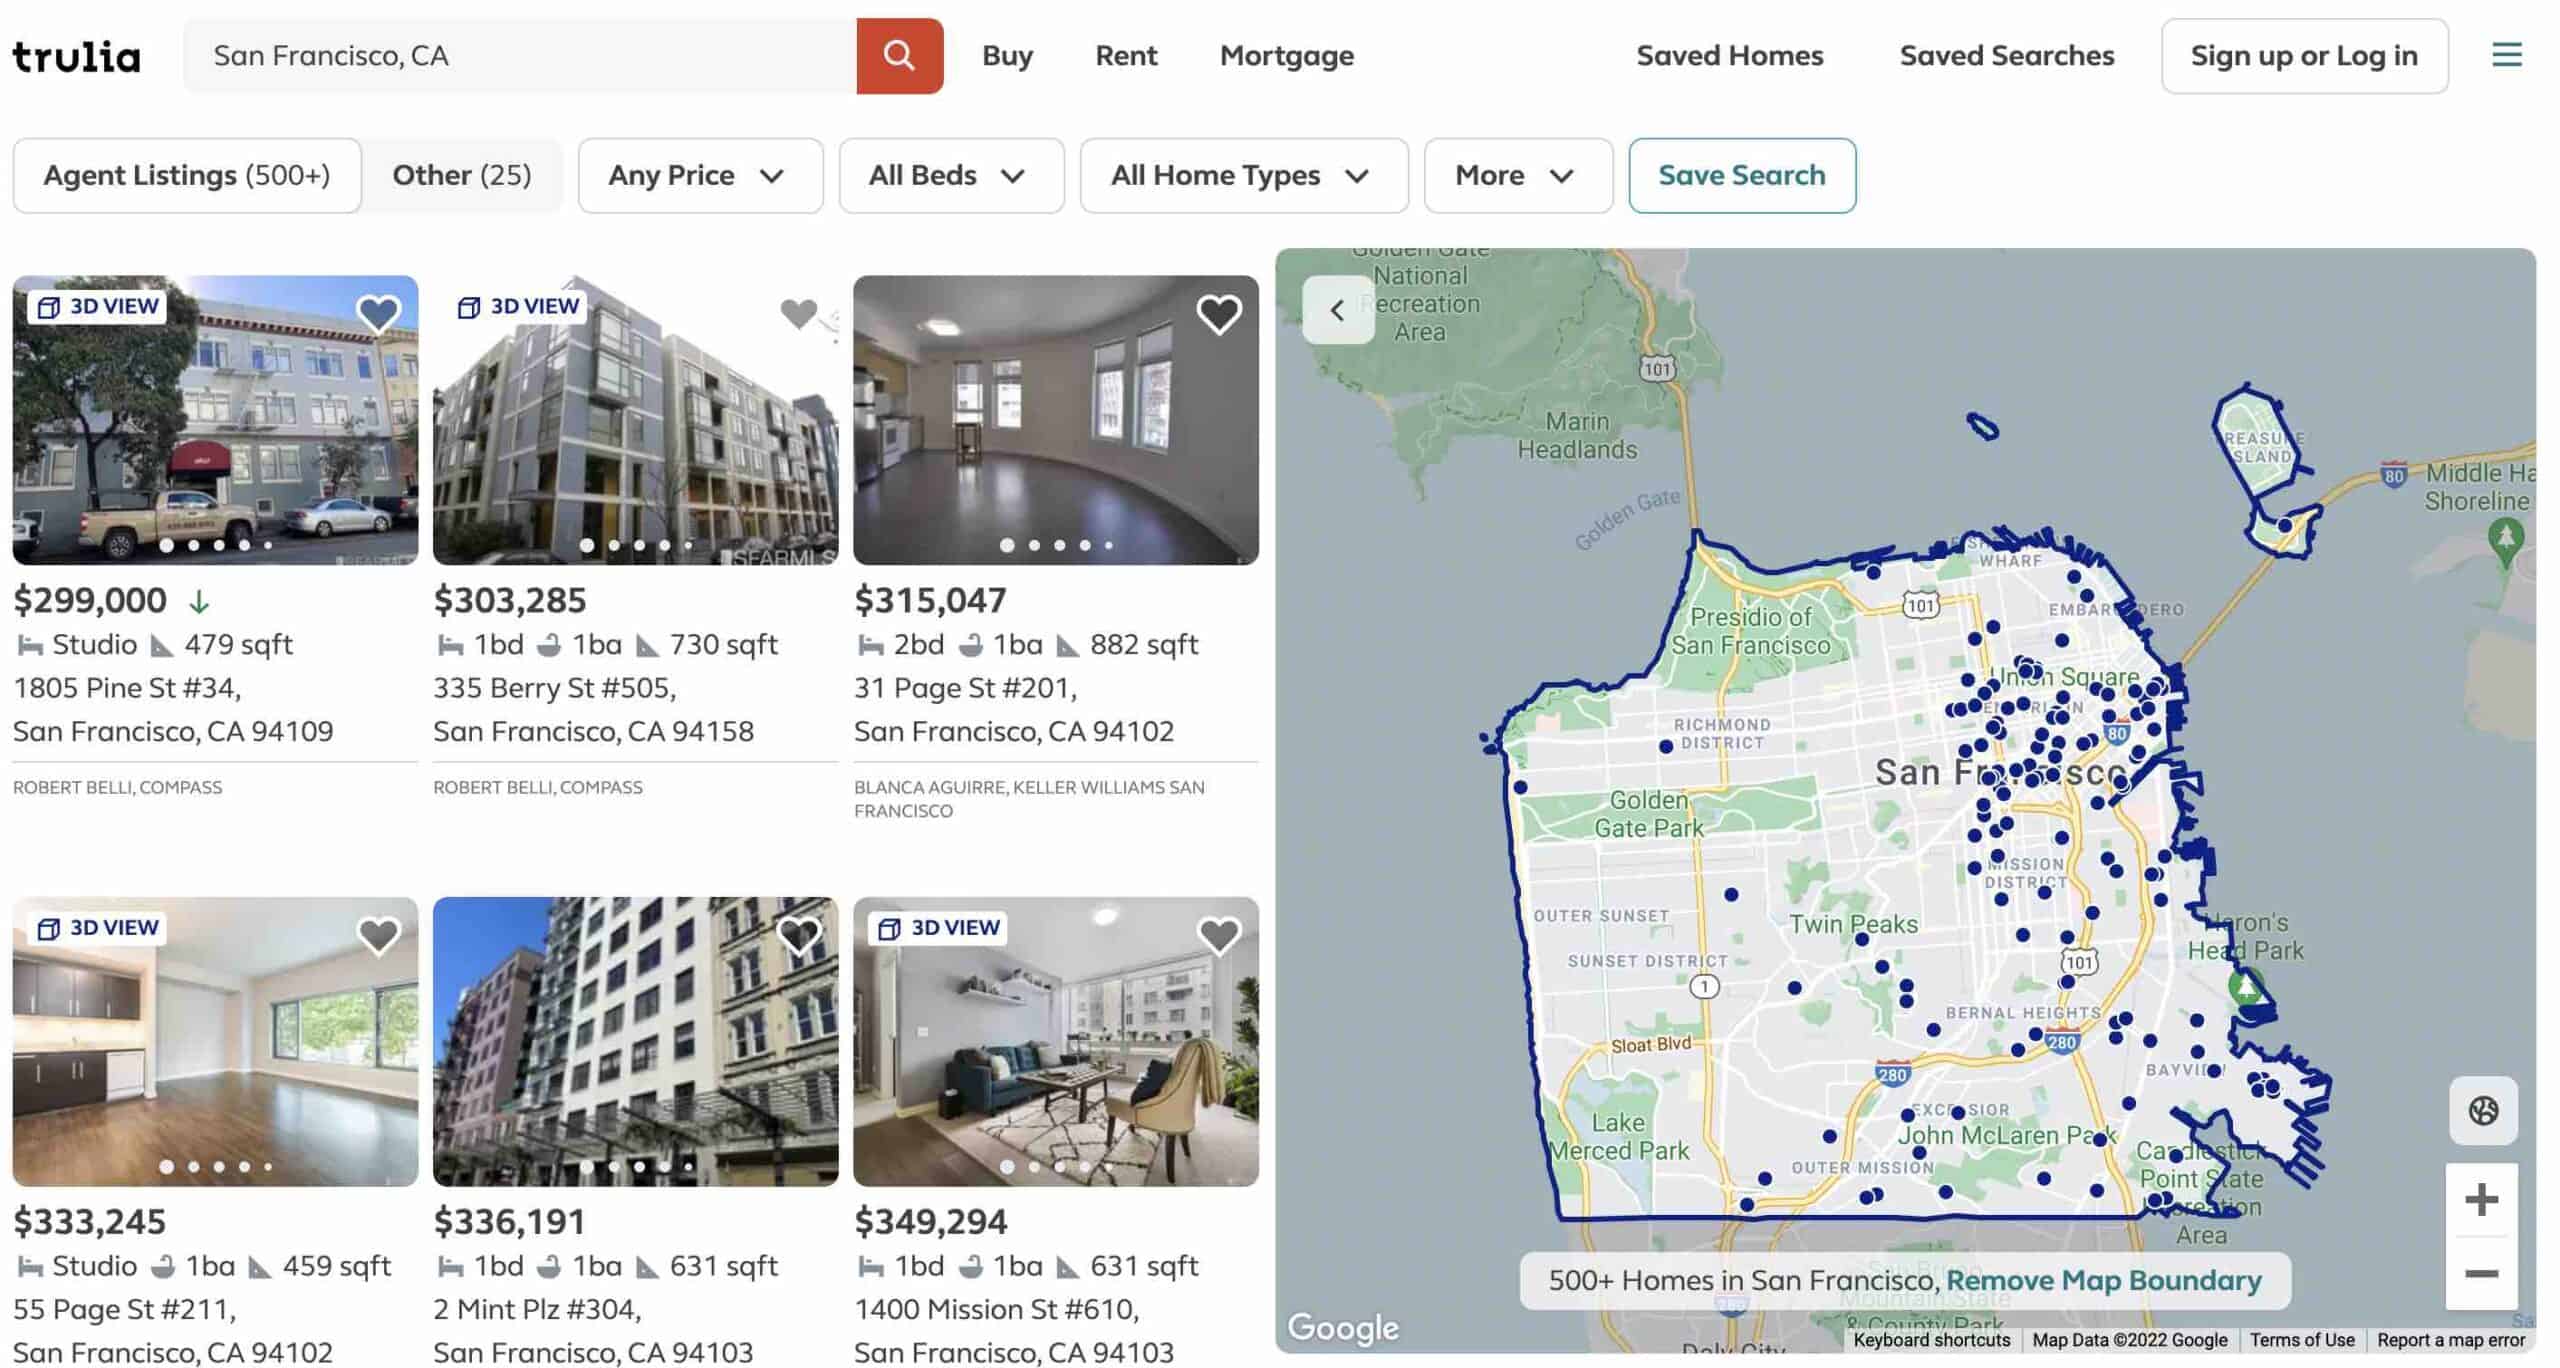 9 Best Apartment Search Websites You Need To Know